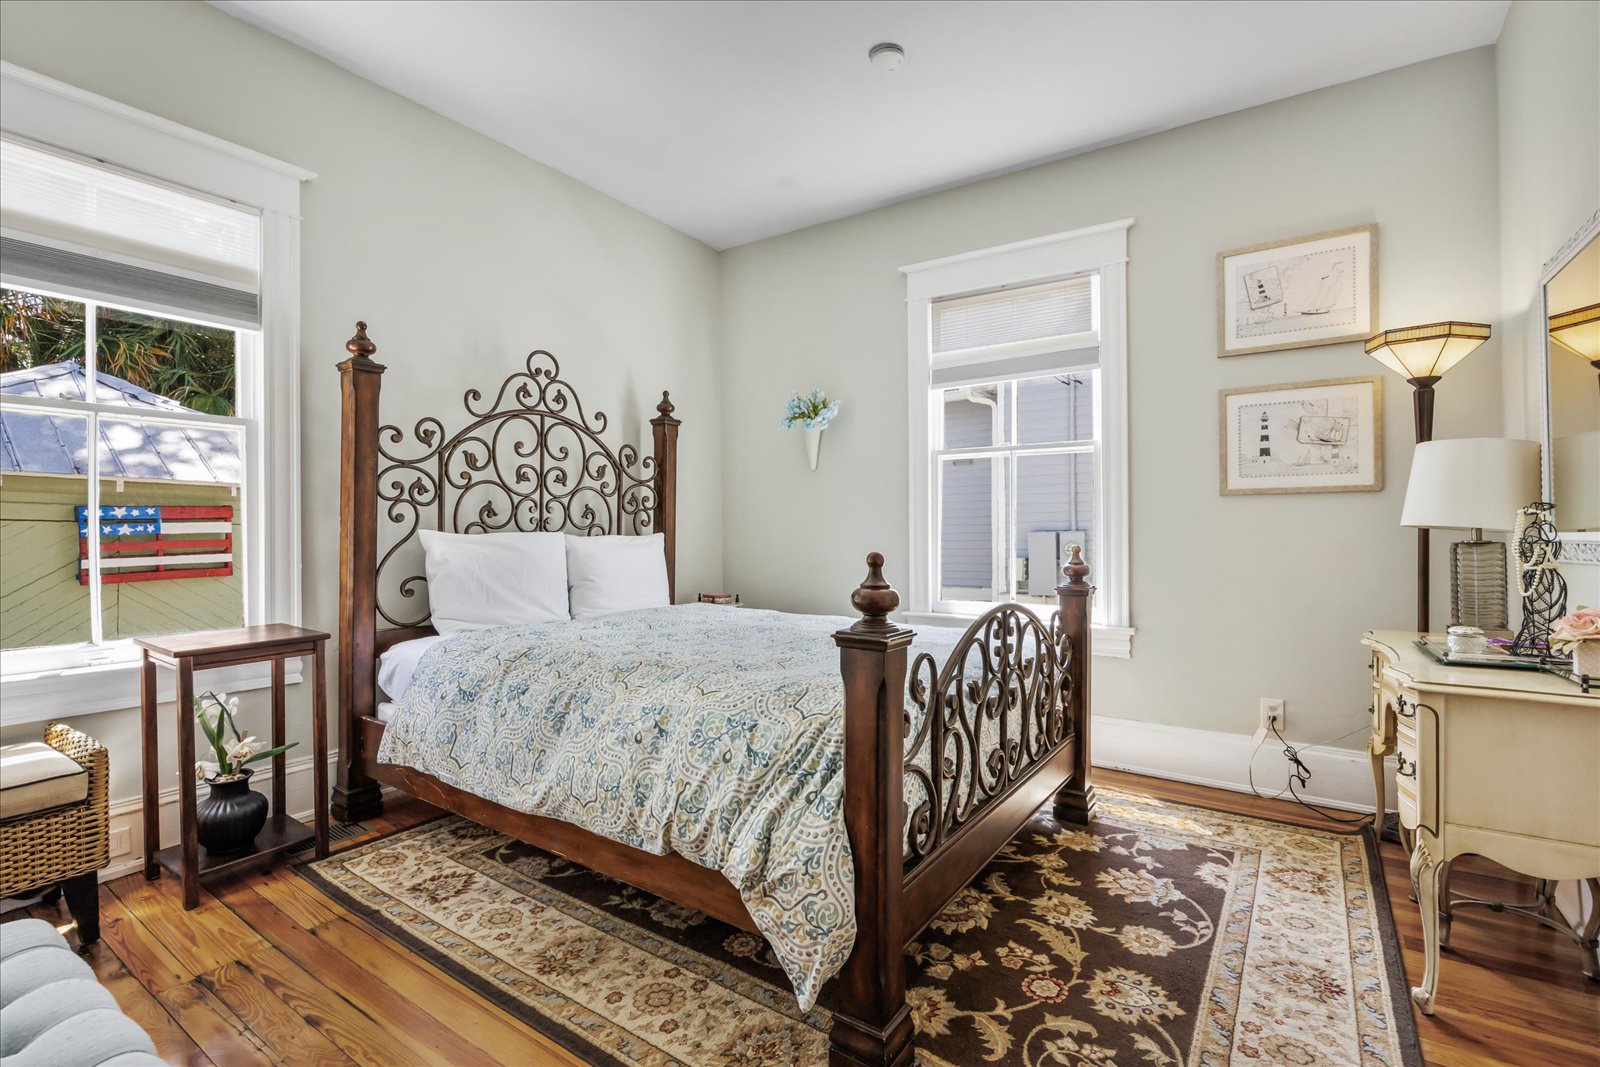 Unit B – The master bedroom offers a regal queen bed & large windows